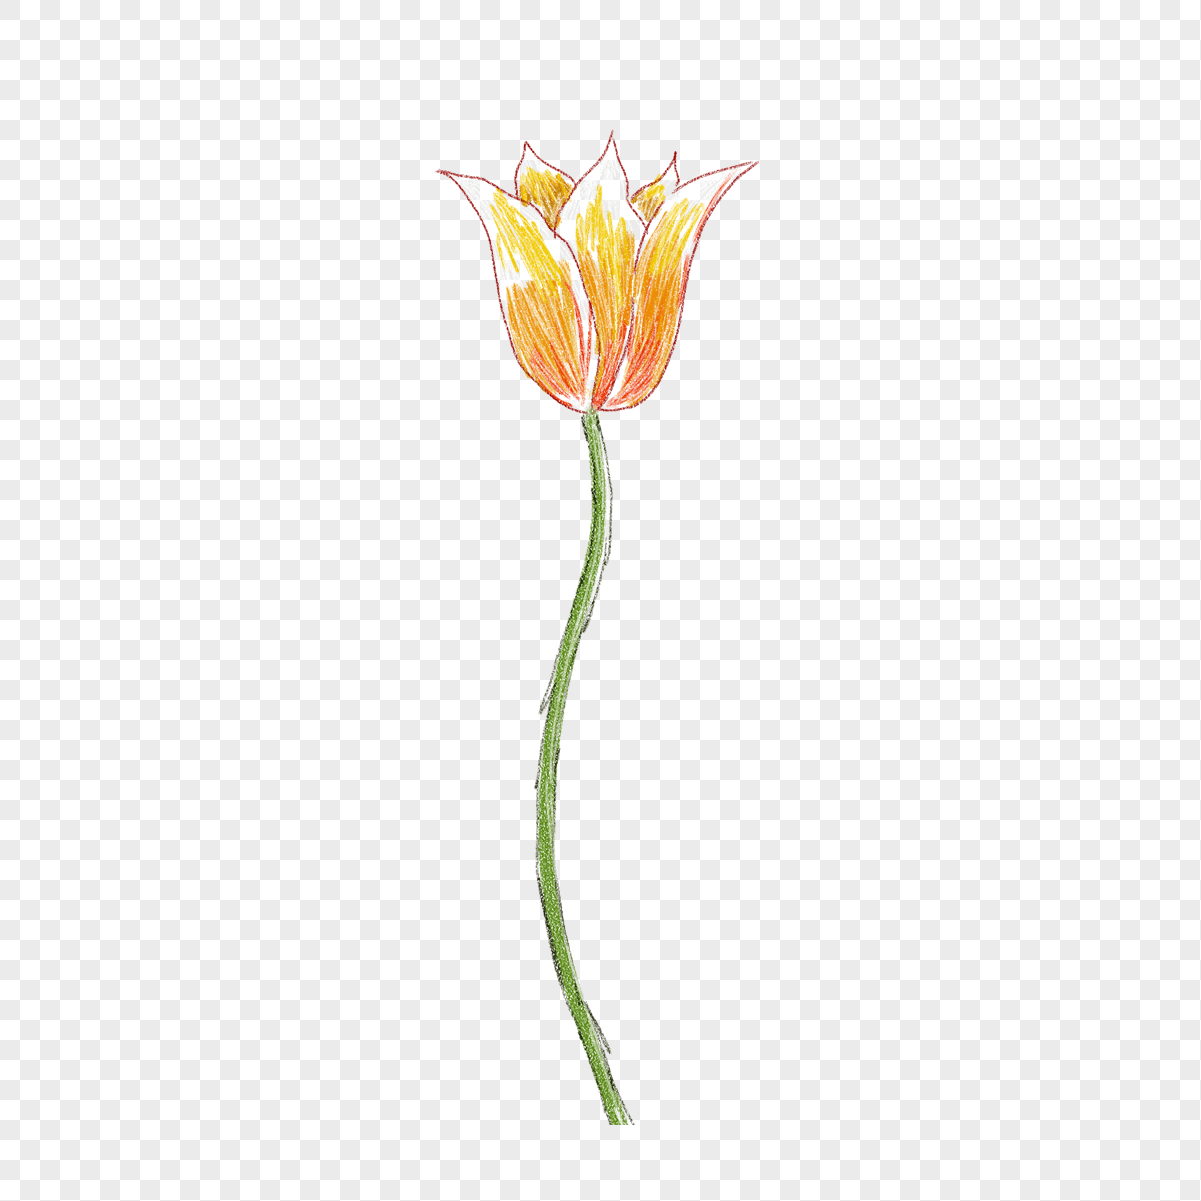 Crayon Flower Logo - Yellow flowers crayon drawing png image_picture free download